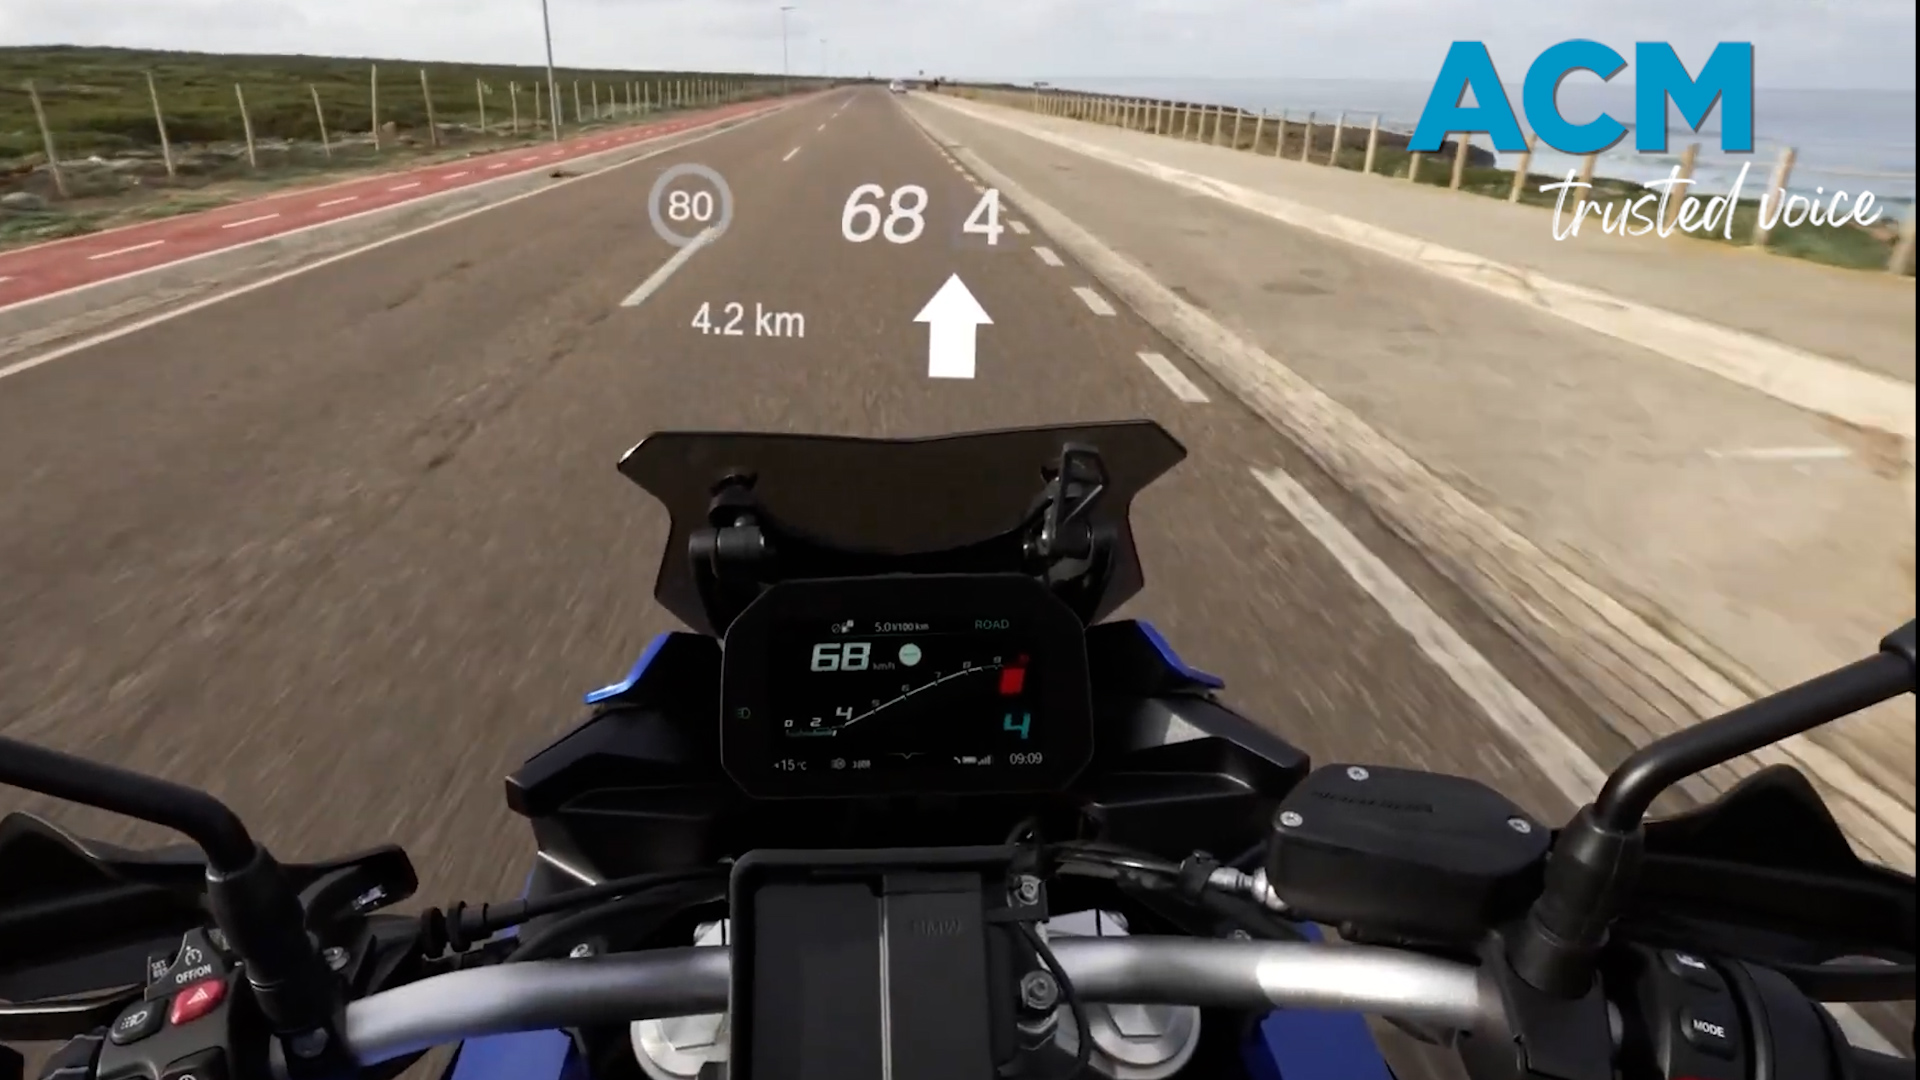 BMW launches AR ‘smart glasses’ for motorcyclists